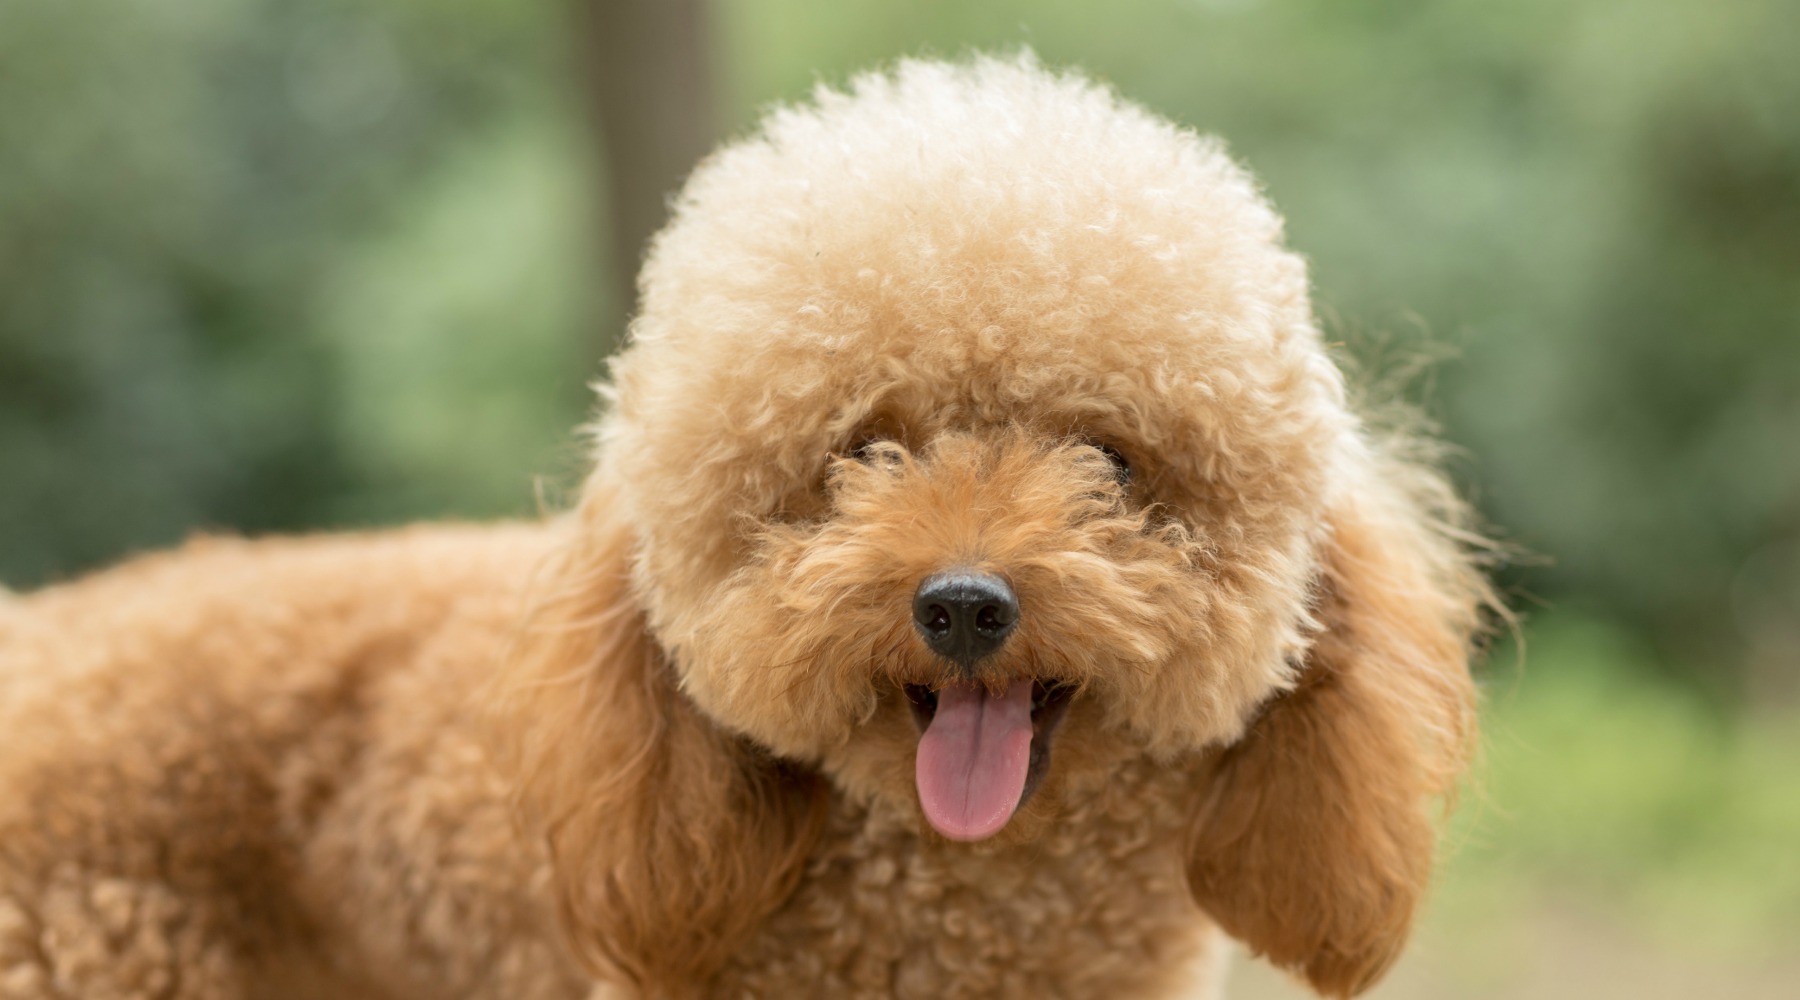 Poodle with common top knot haircut